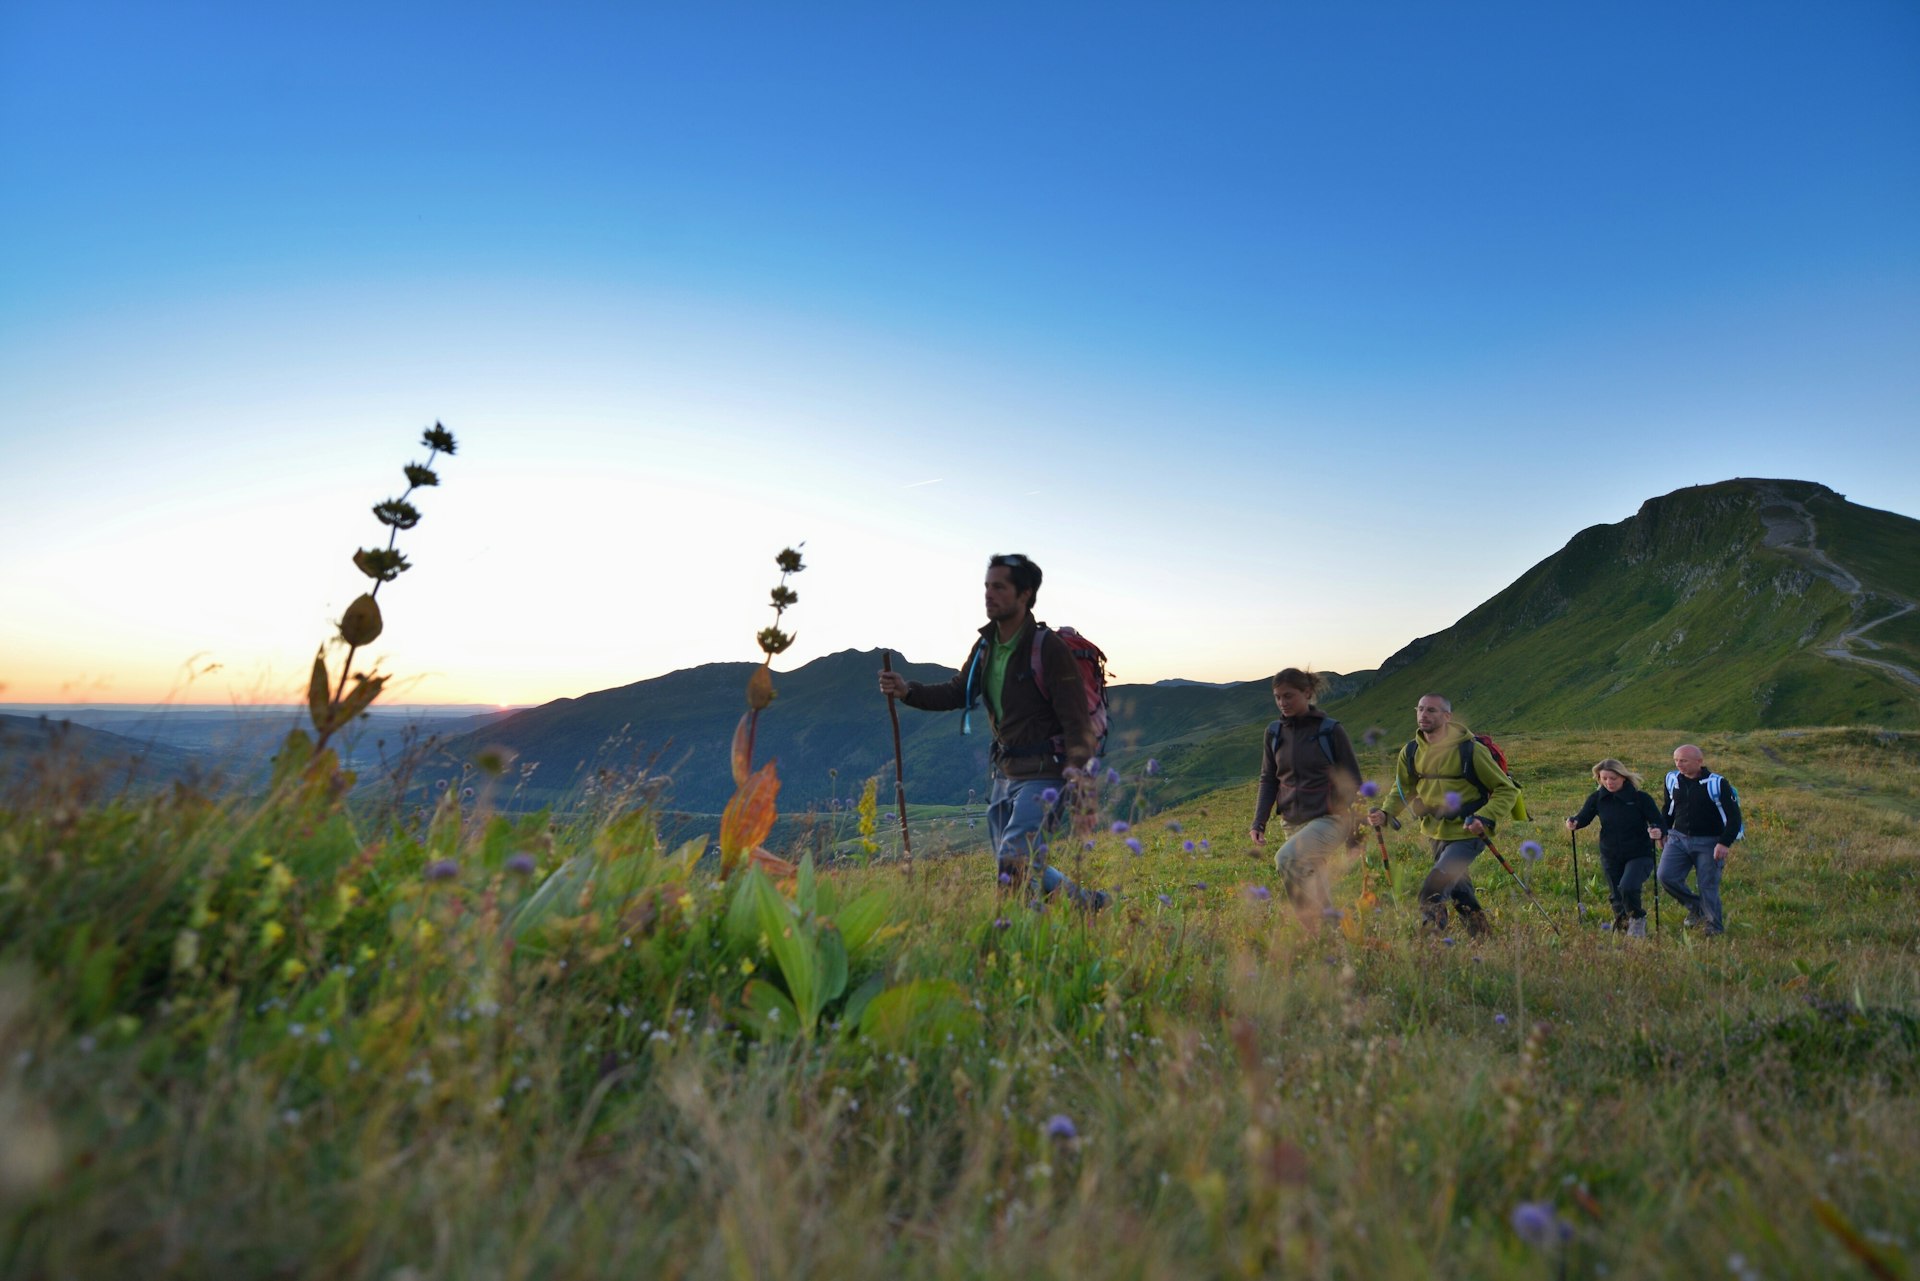 Hikers walk through wildflowers in Puy Mary